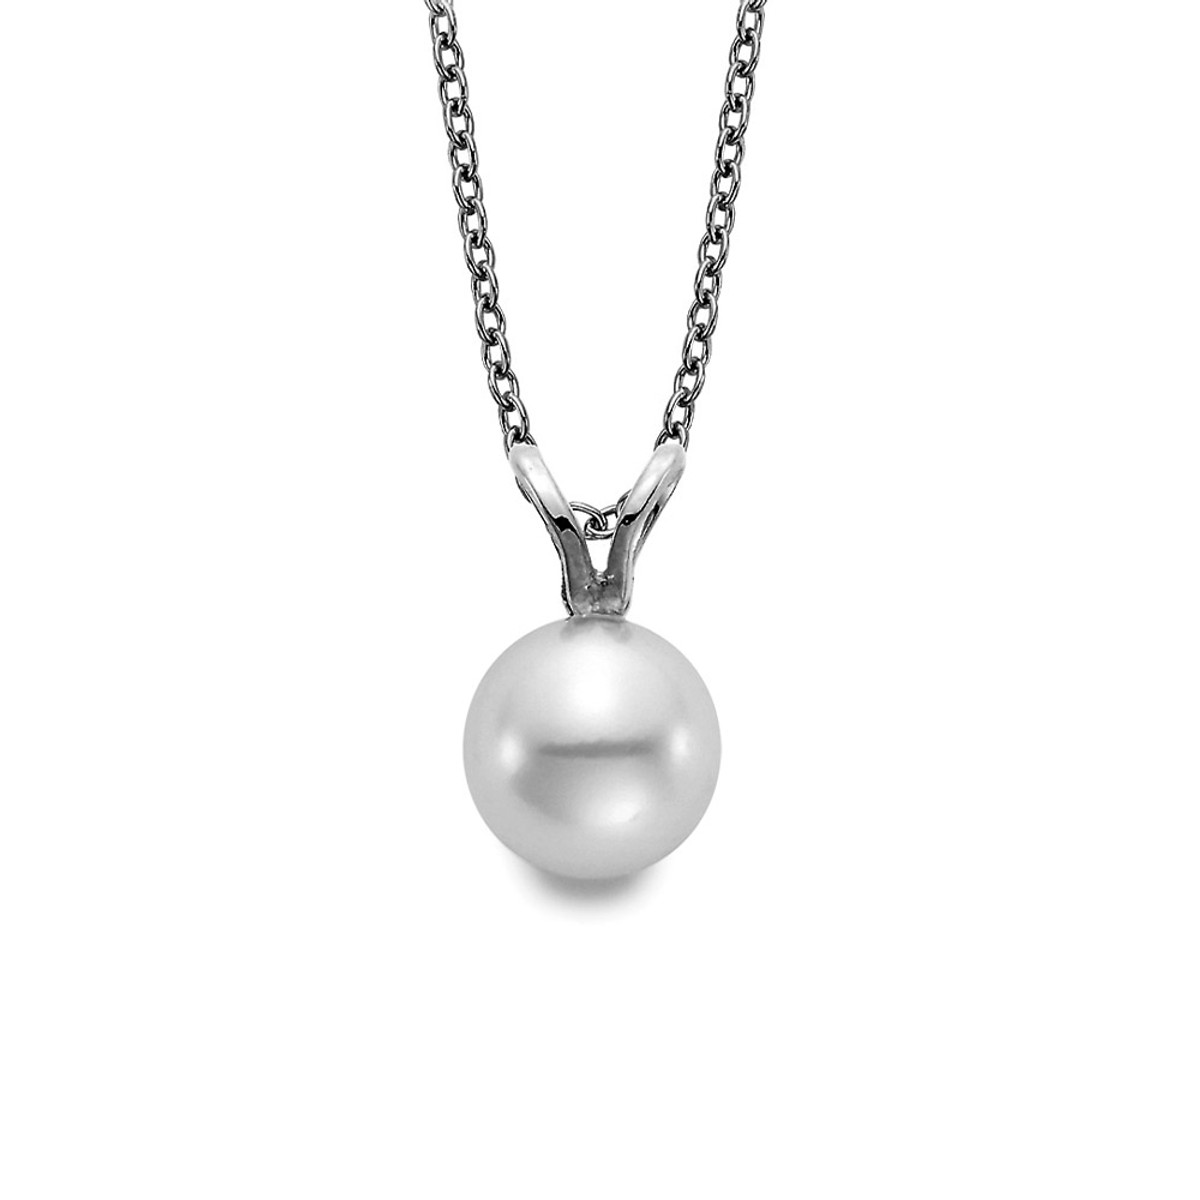 Hyde Park 18K White Gold Pearl Pendant. 7-7.5MM. A Grade Akoya Pearl.-25801 Product Image